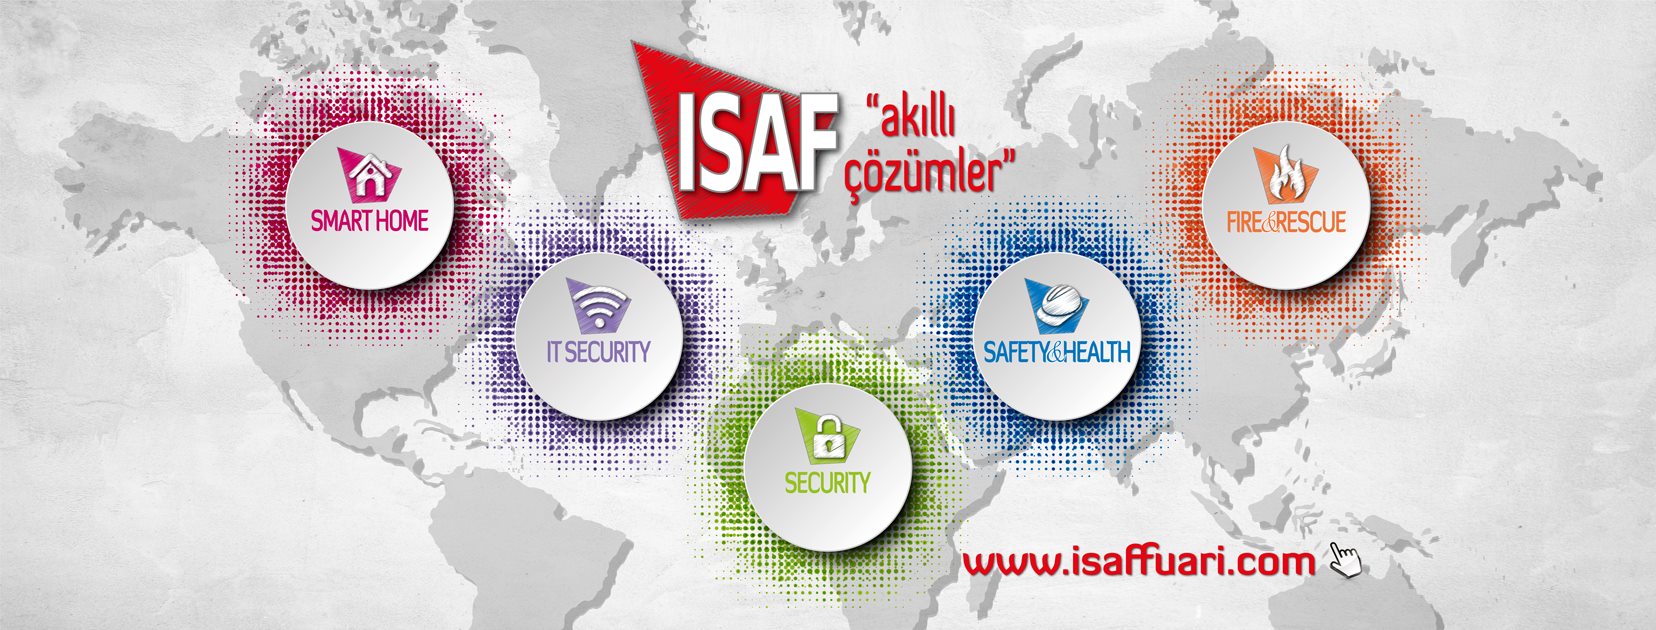 ISAF security system in Turkey